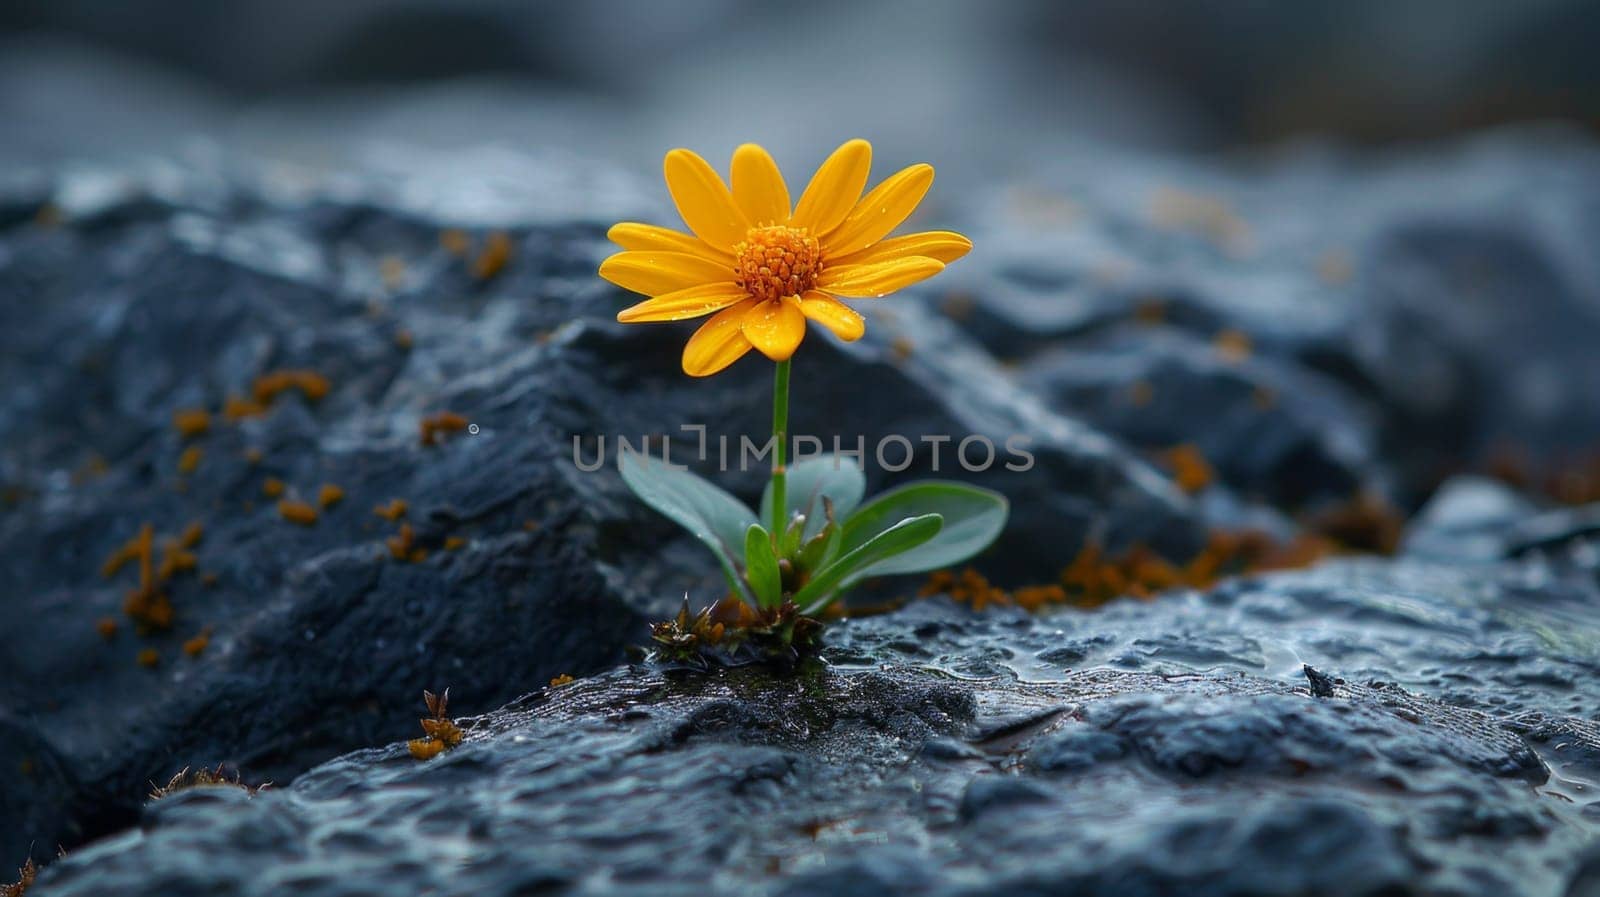 A flower sprouted in rocky rocks. The plant grows on a stone.